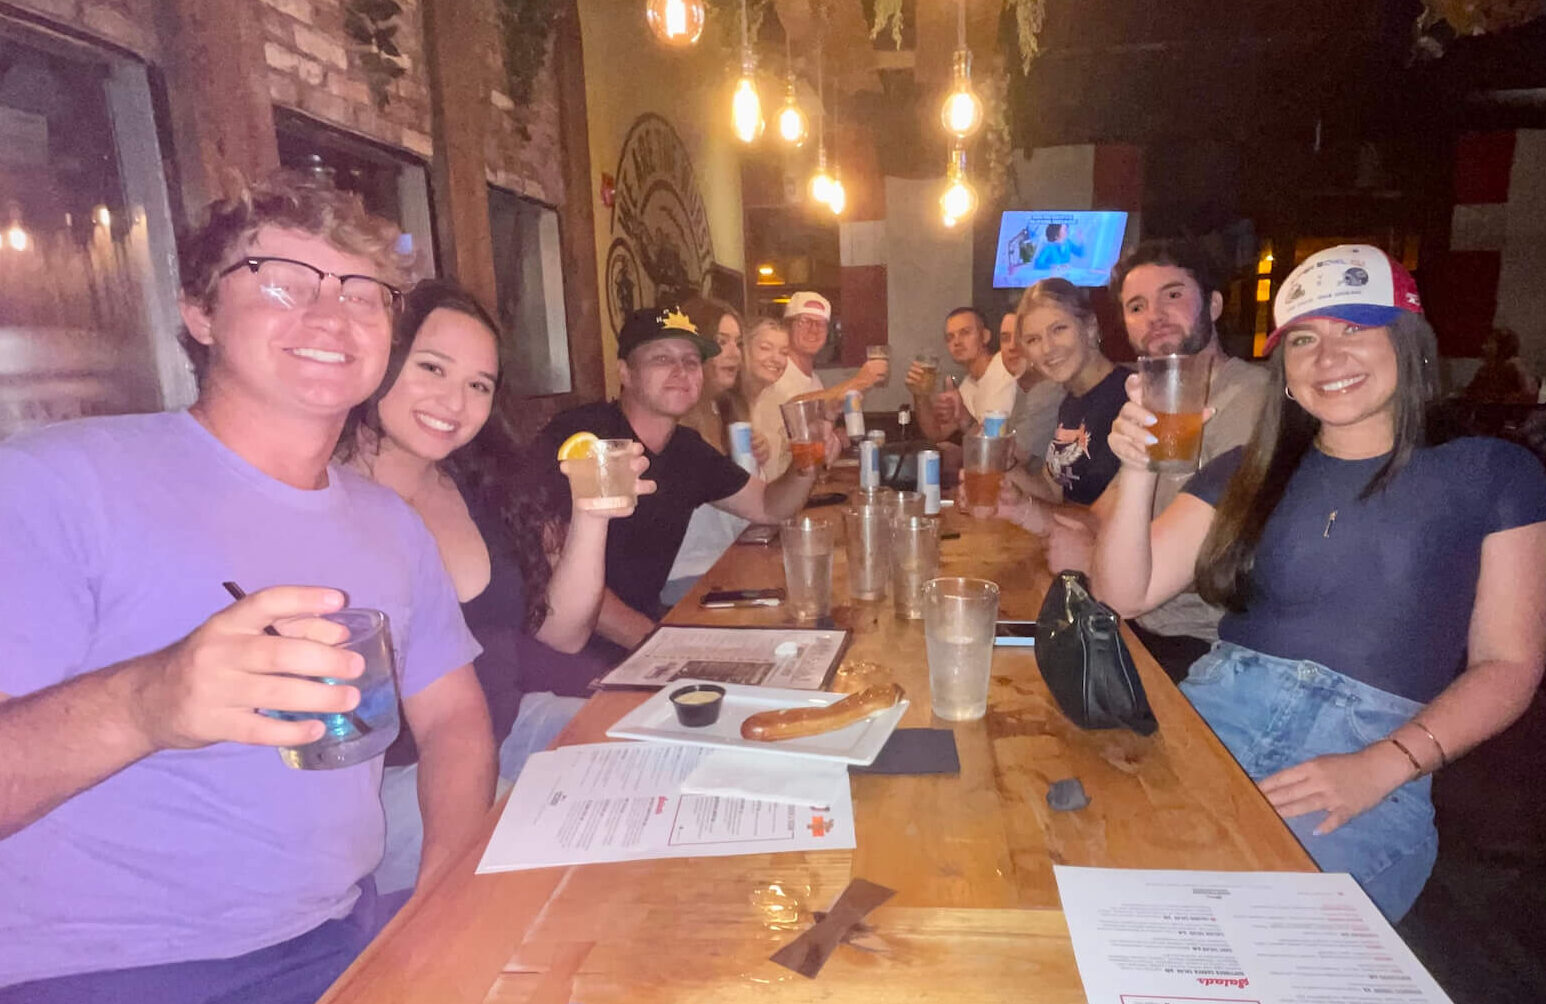 Hoptinger Bier Garden & Sausage House Jacksonville Beach FL 32250 trivia night group of young people smiling and raising their glasses